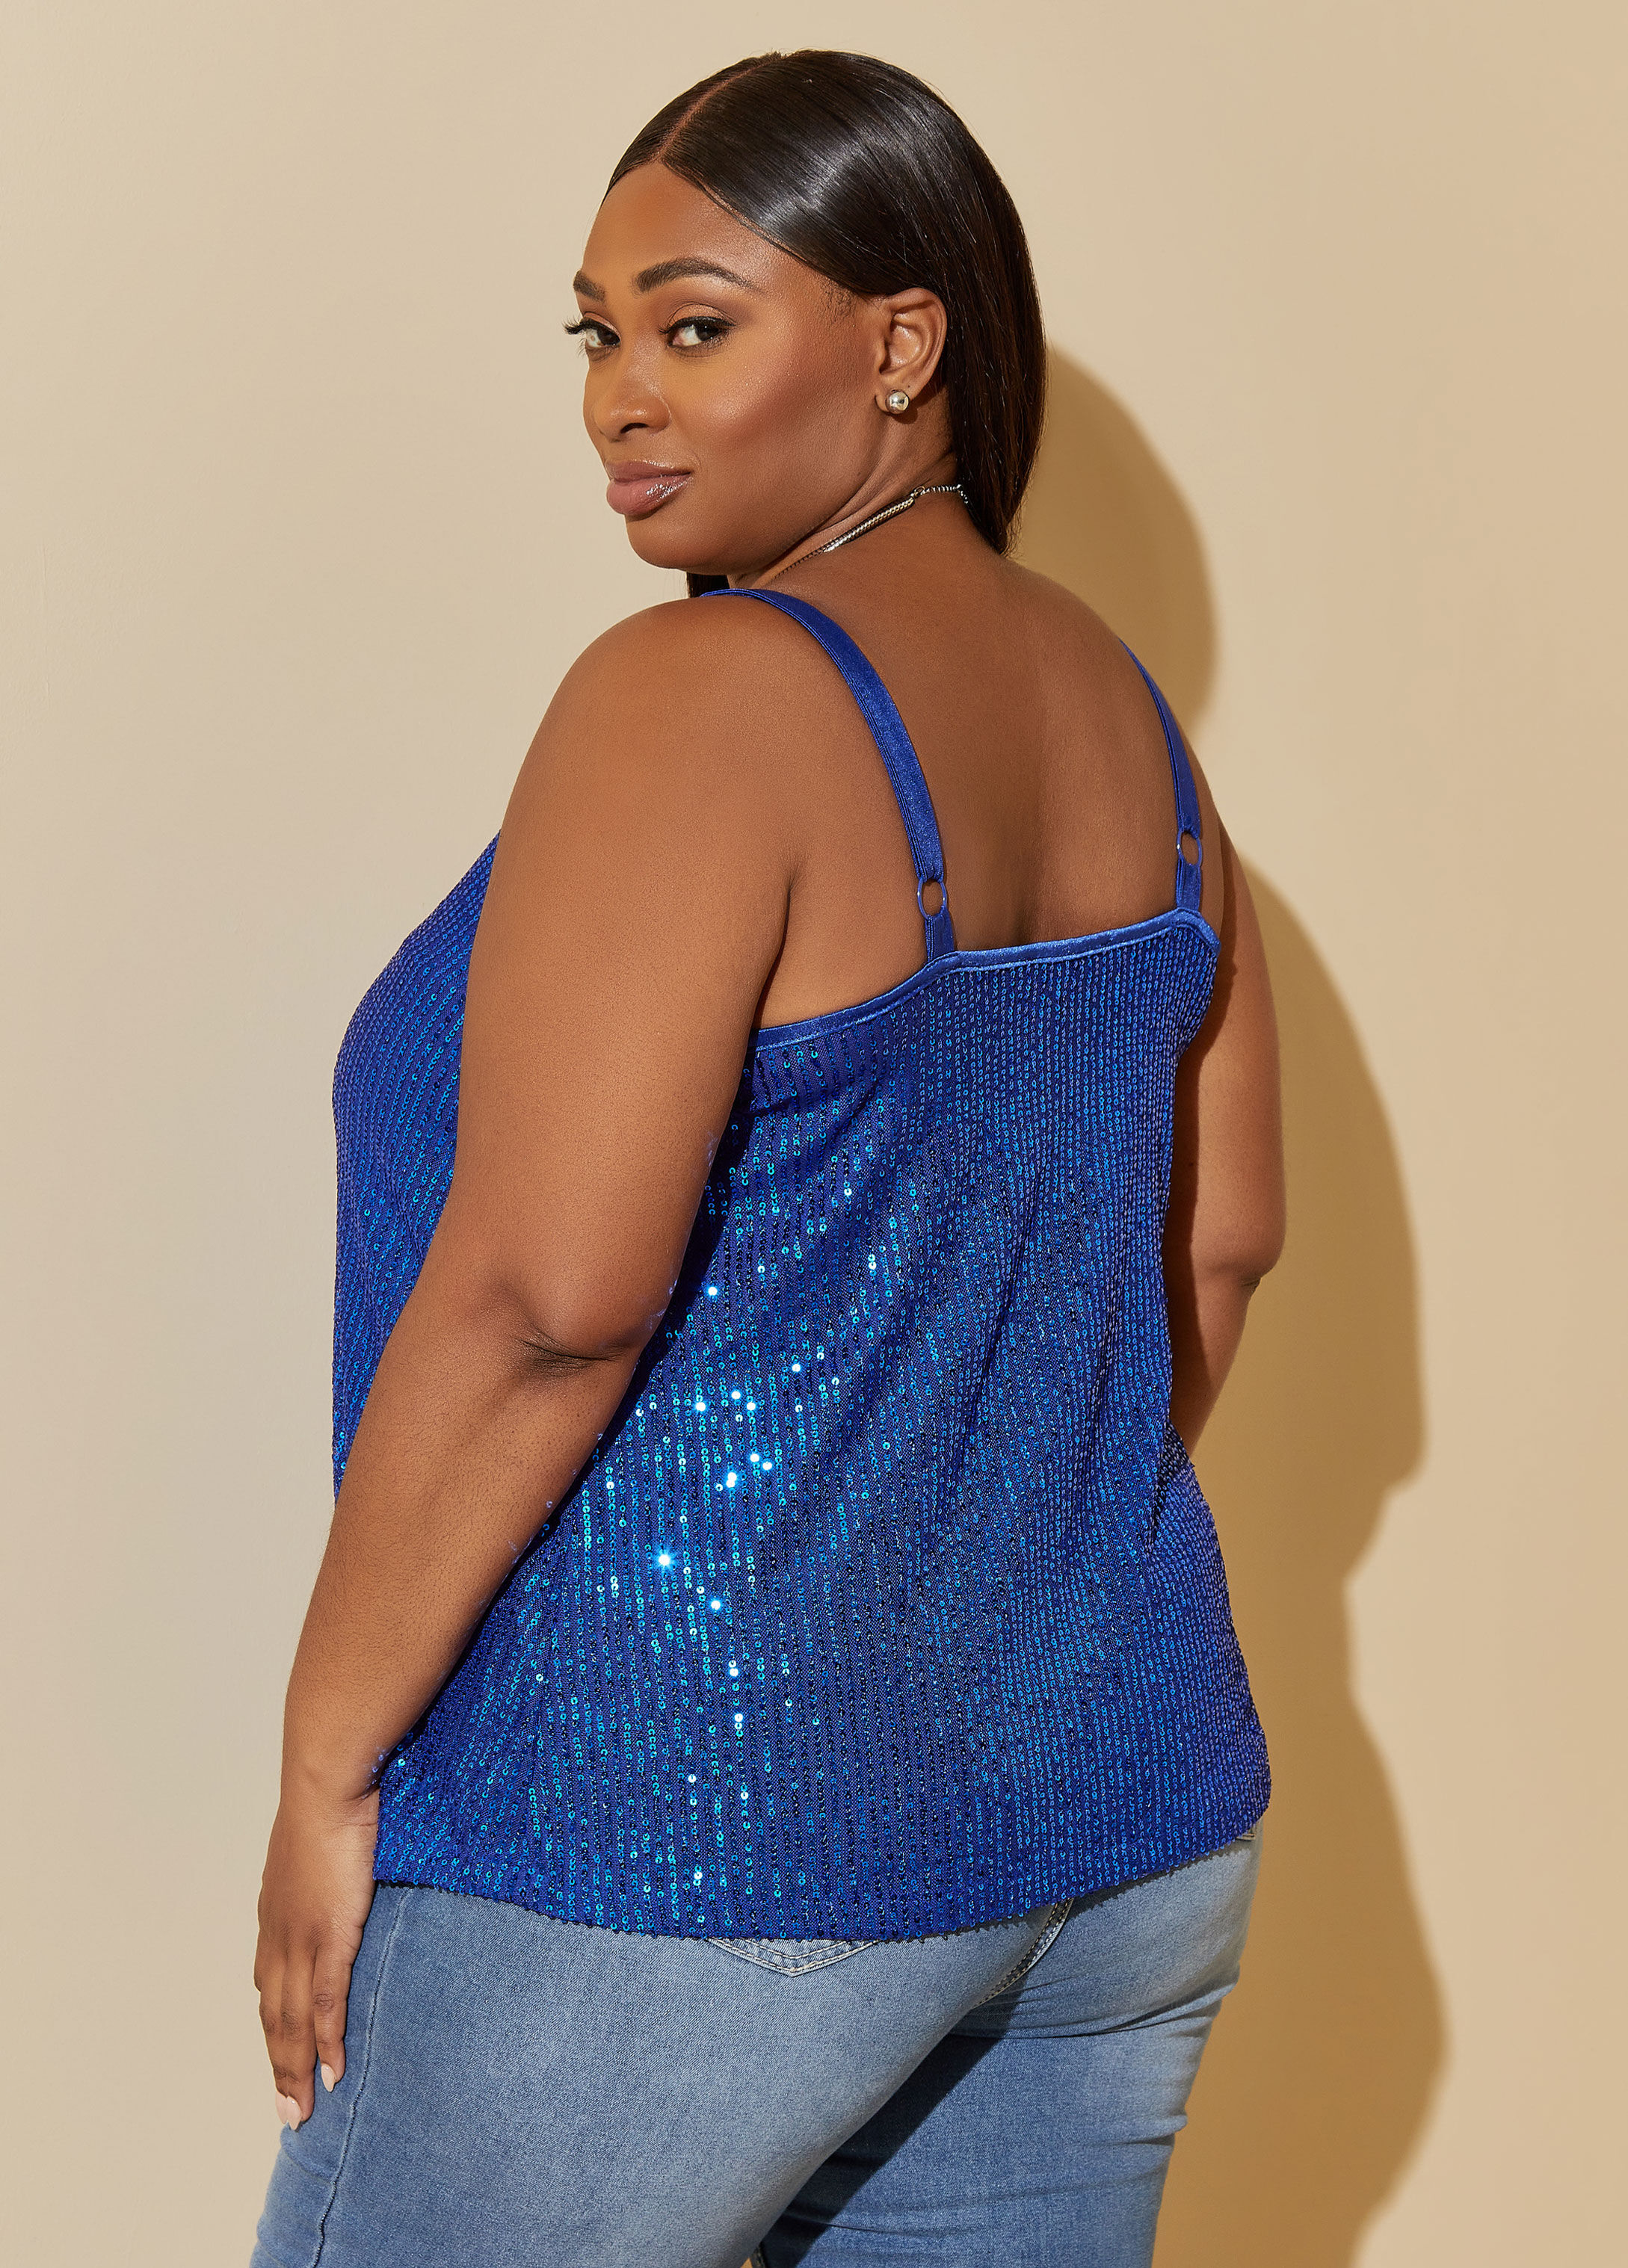 Plus Size holiday top plus size sleeveless top plus size party tops